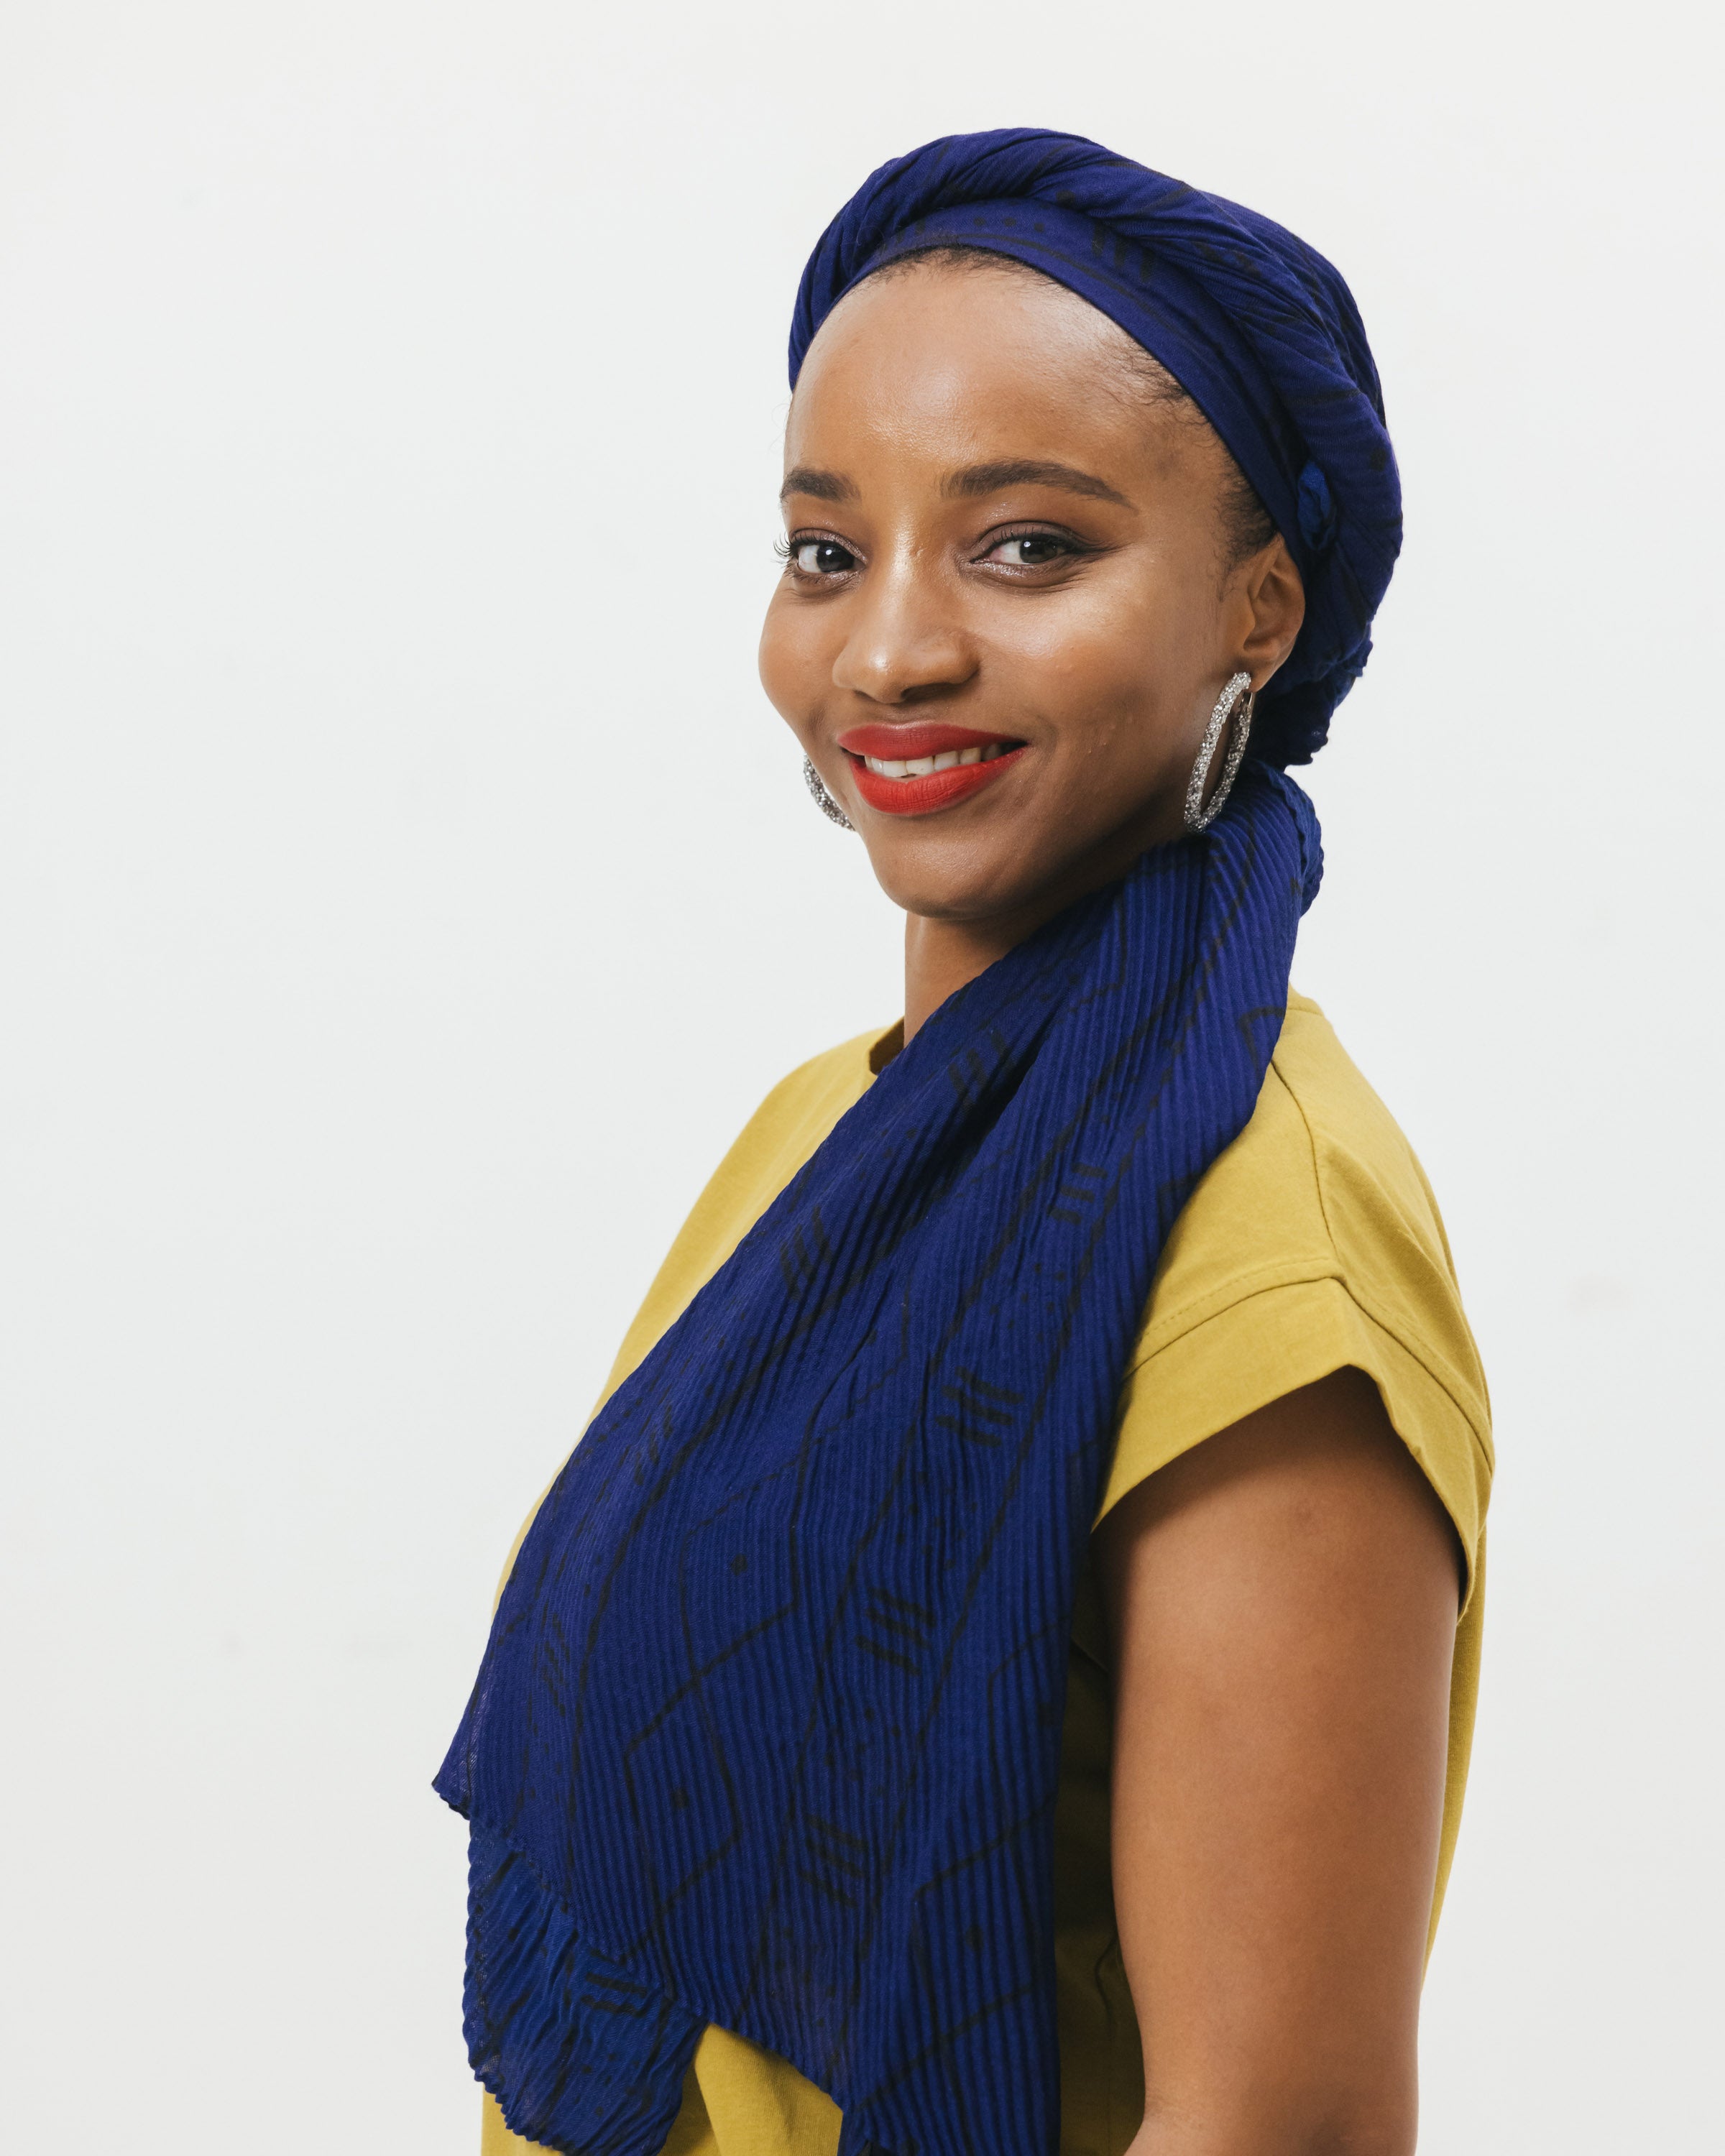 Printed Pleated Head Wrap in Essence